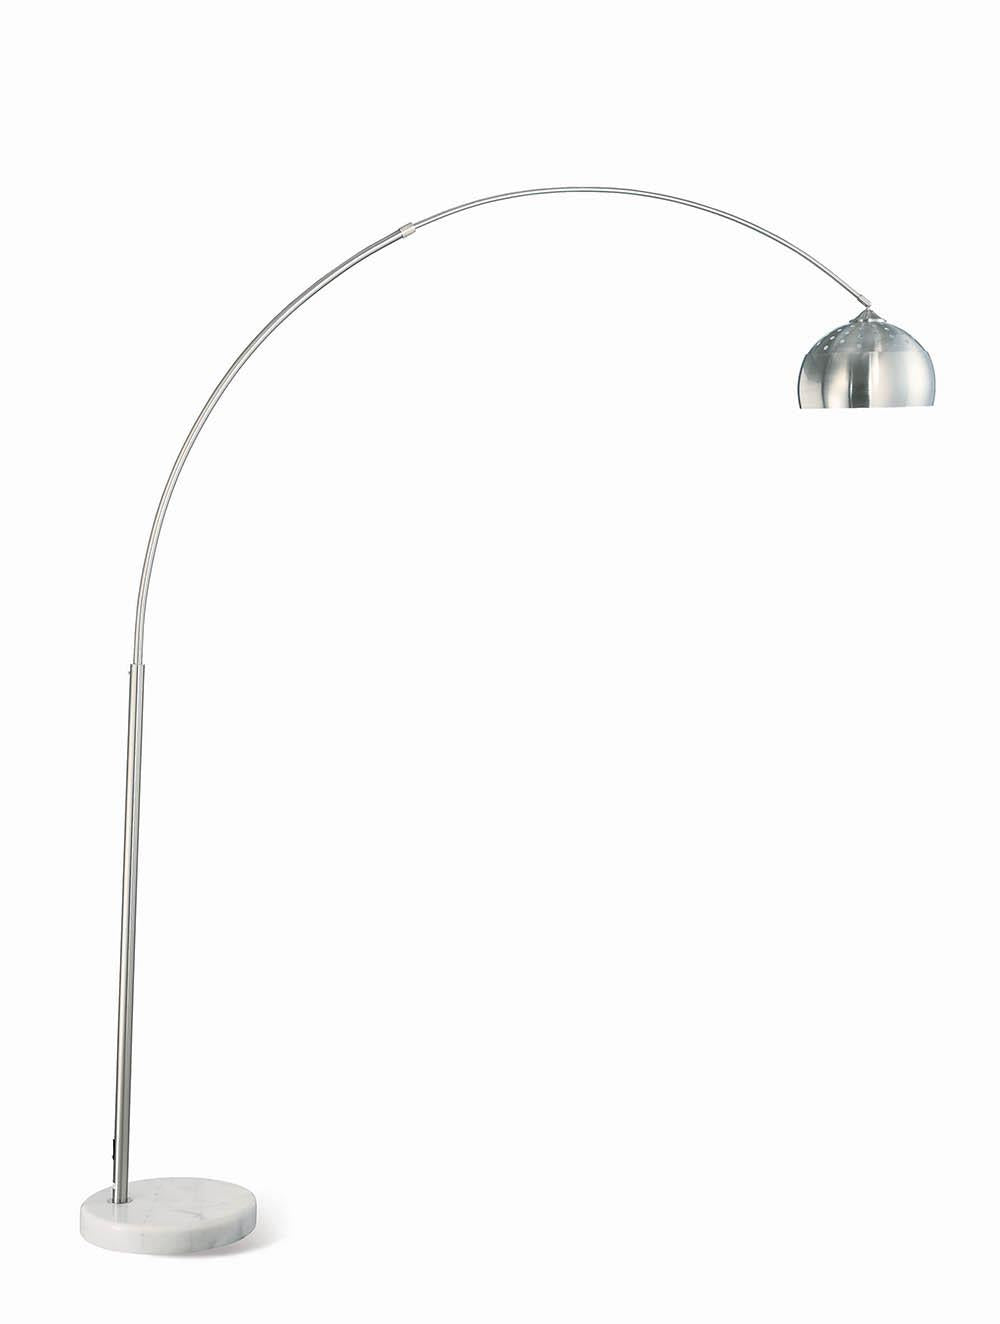 Krester Arched Floor Lamp Brushed Steel and Chrome  Half Price Furniture